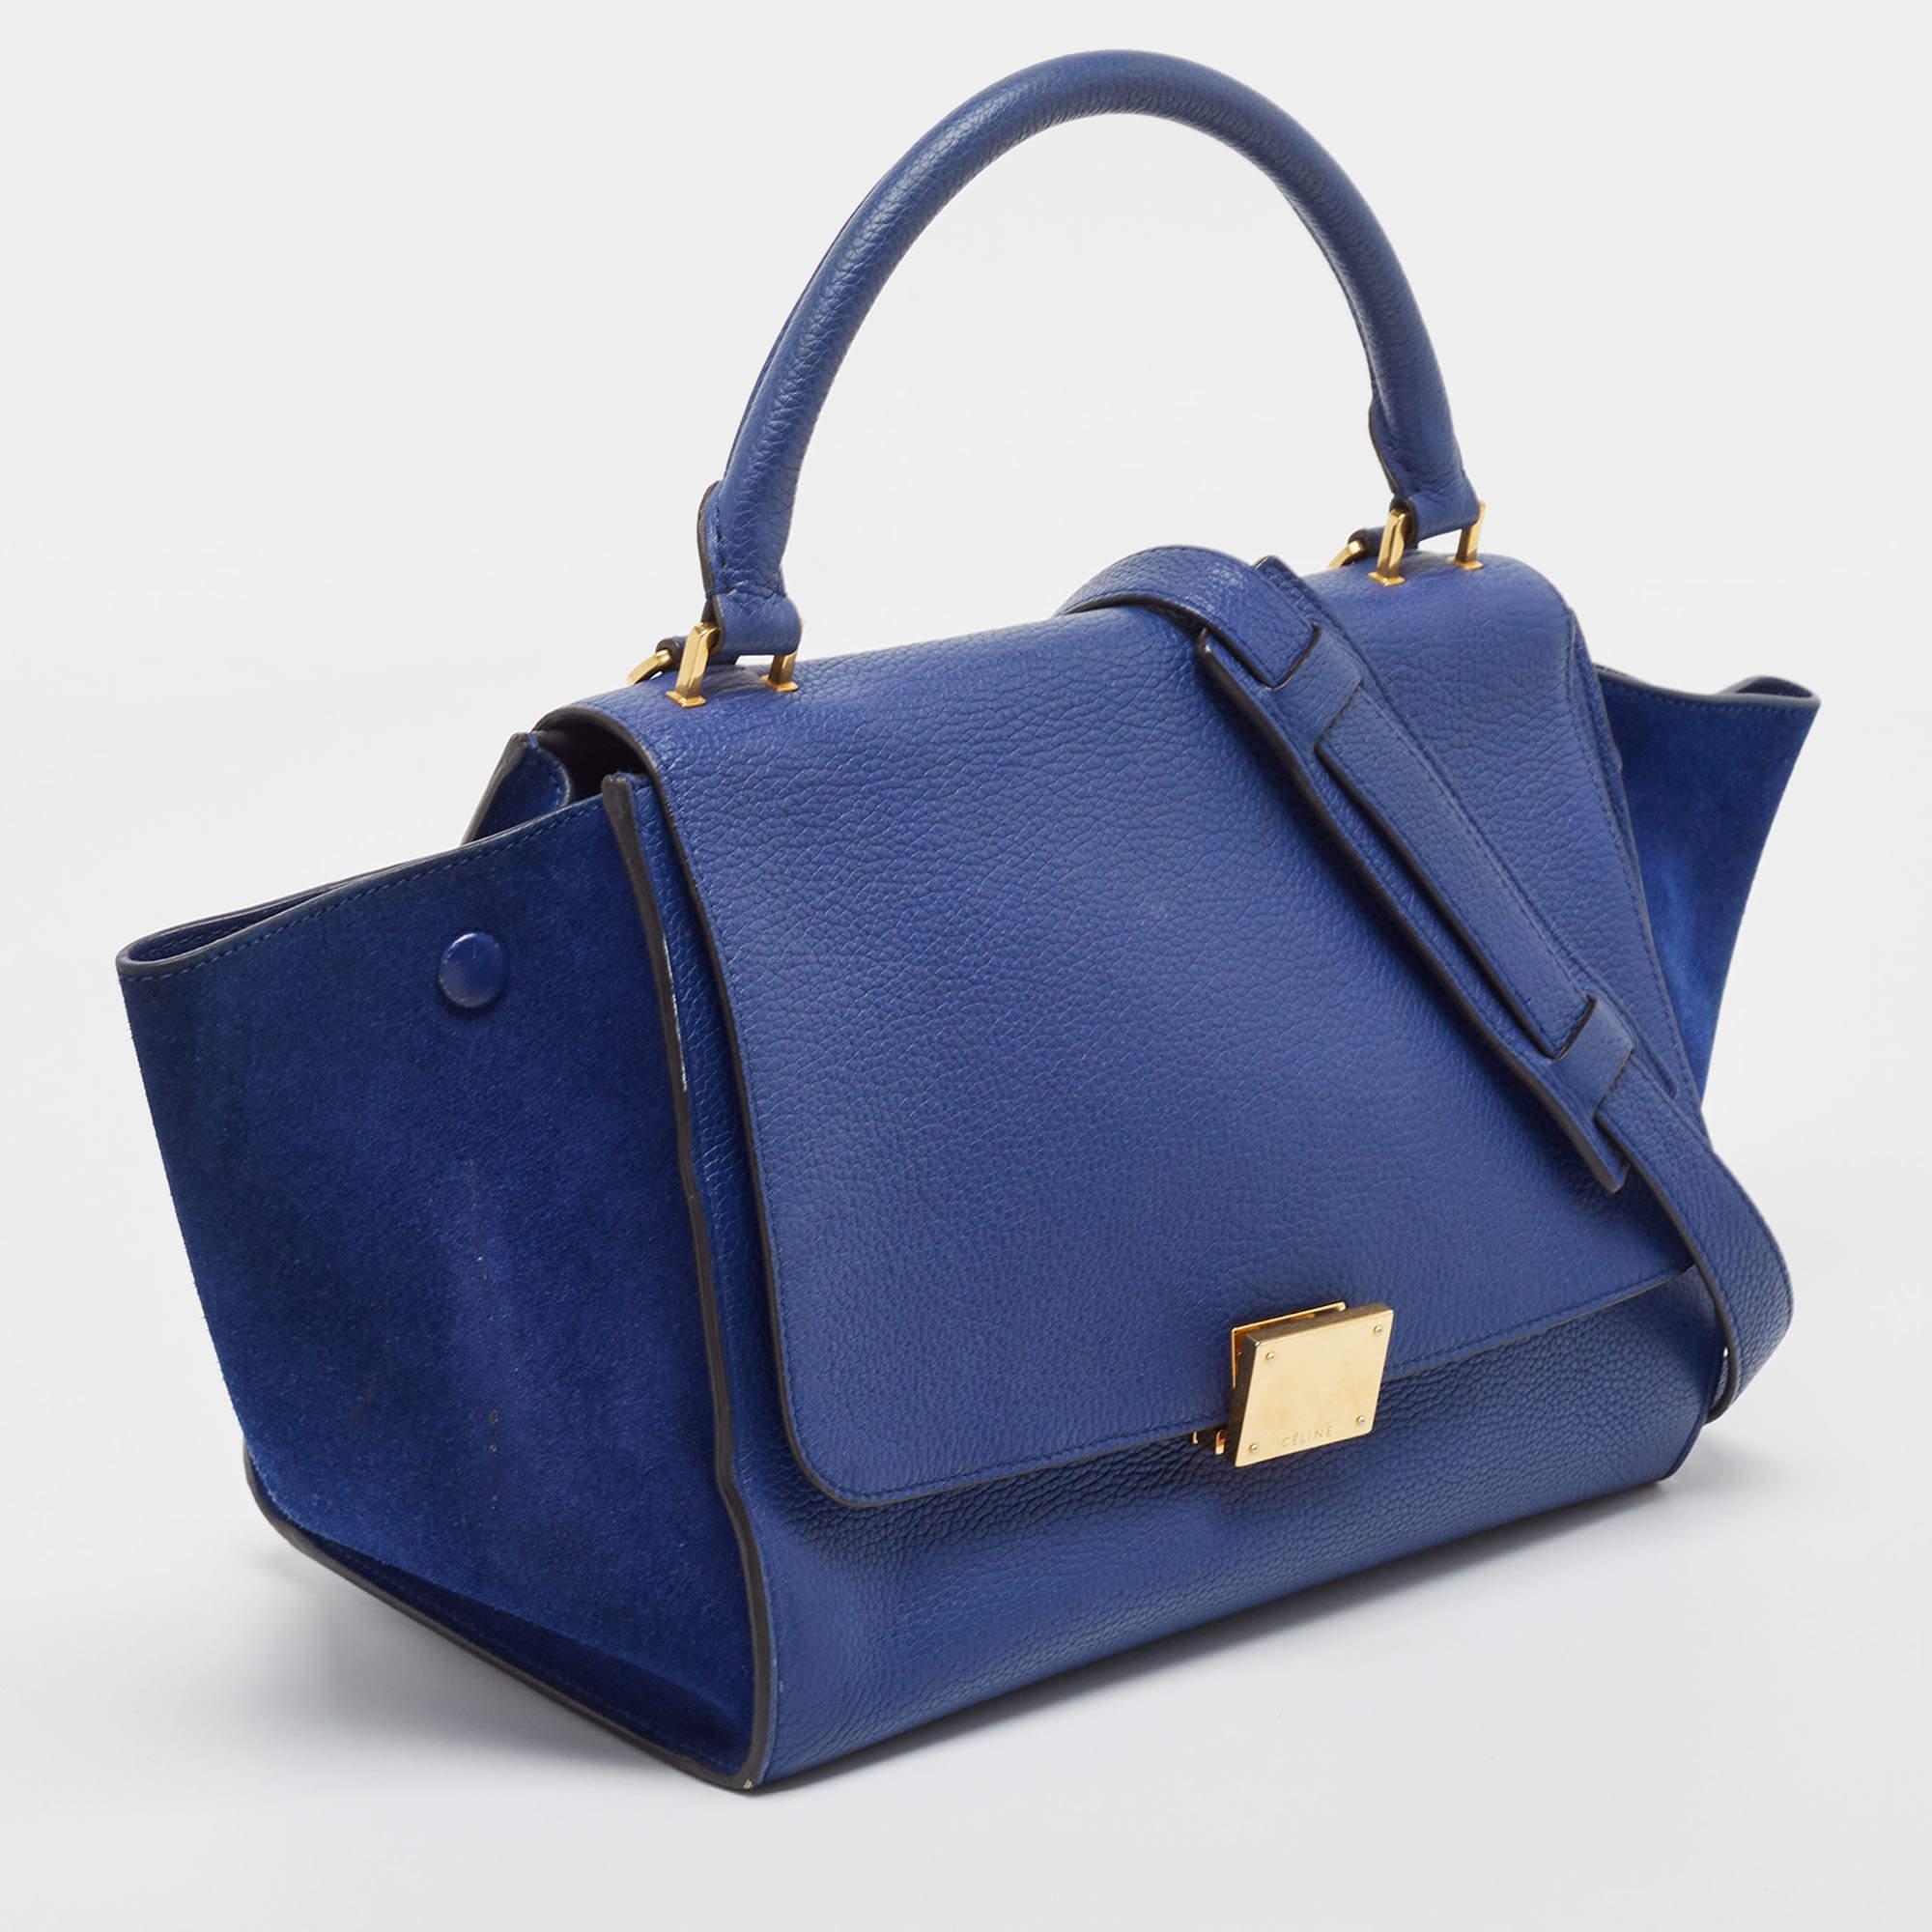 Featuring a simple yet luxurious style, this Celine bag is a valuable addition to your closet. Crafted from leather and suede, it is characterized by flappy wings, gold-tone hardware, and a back zipper pocket. The front flap of this blue tote opens